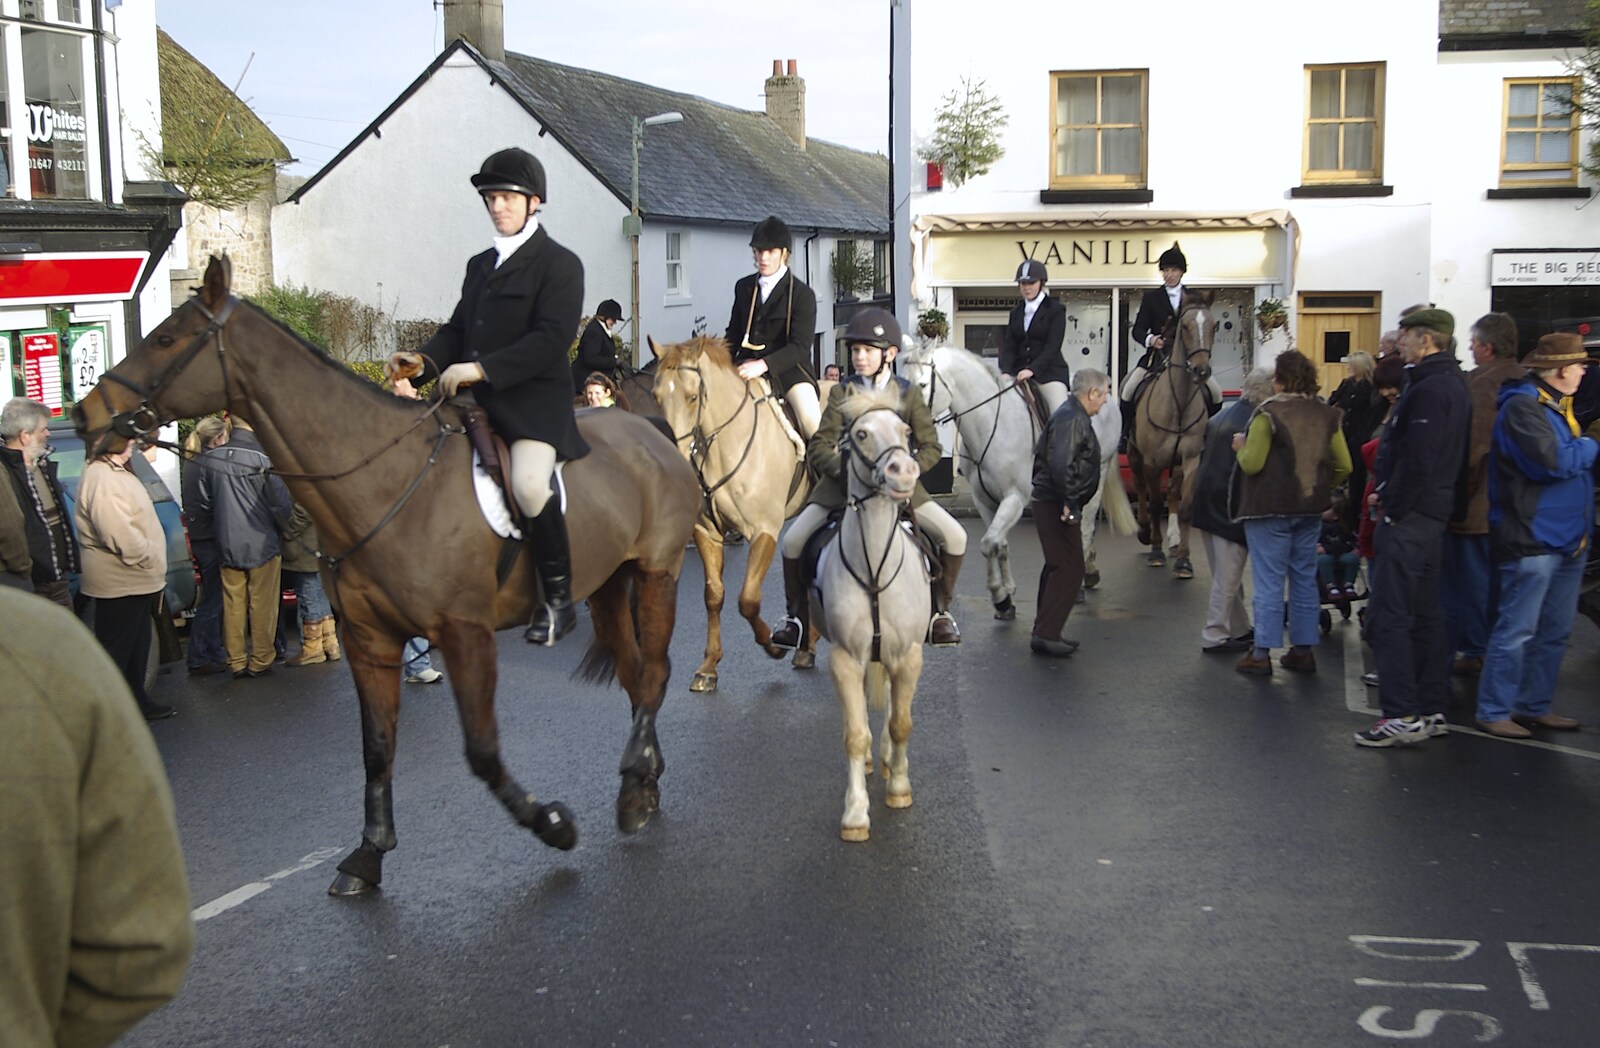 More riders join the throng from A Boxing Day Hunt, Chagford, Devon - 26th December 2007